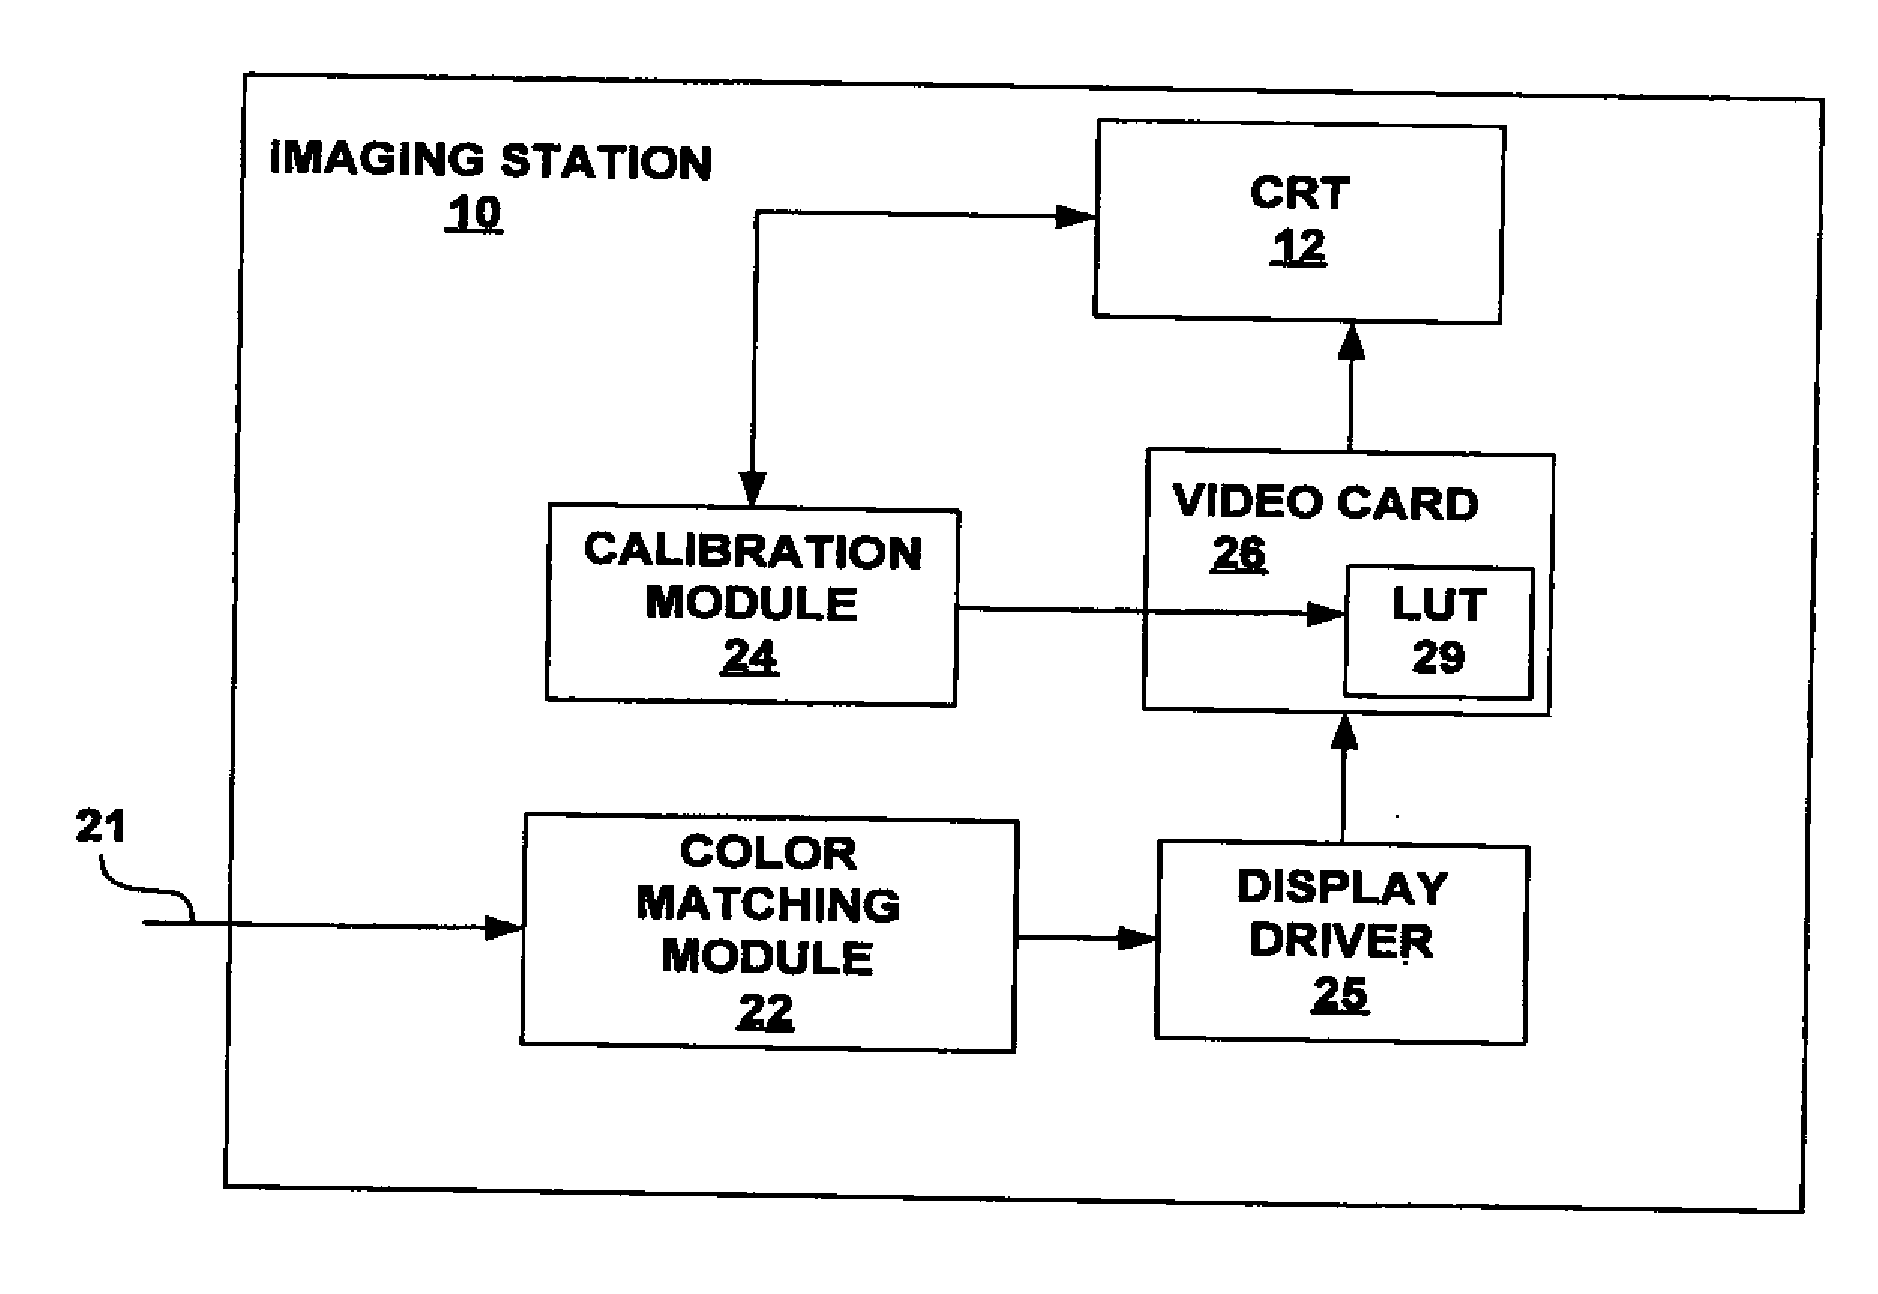 Calibration techniques for imaging devices